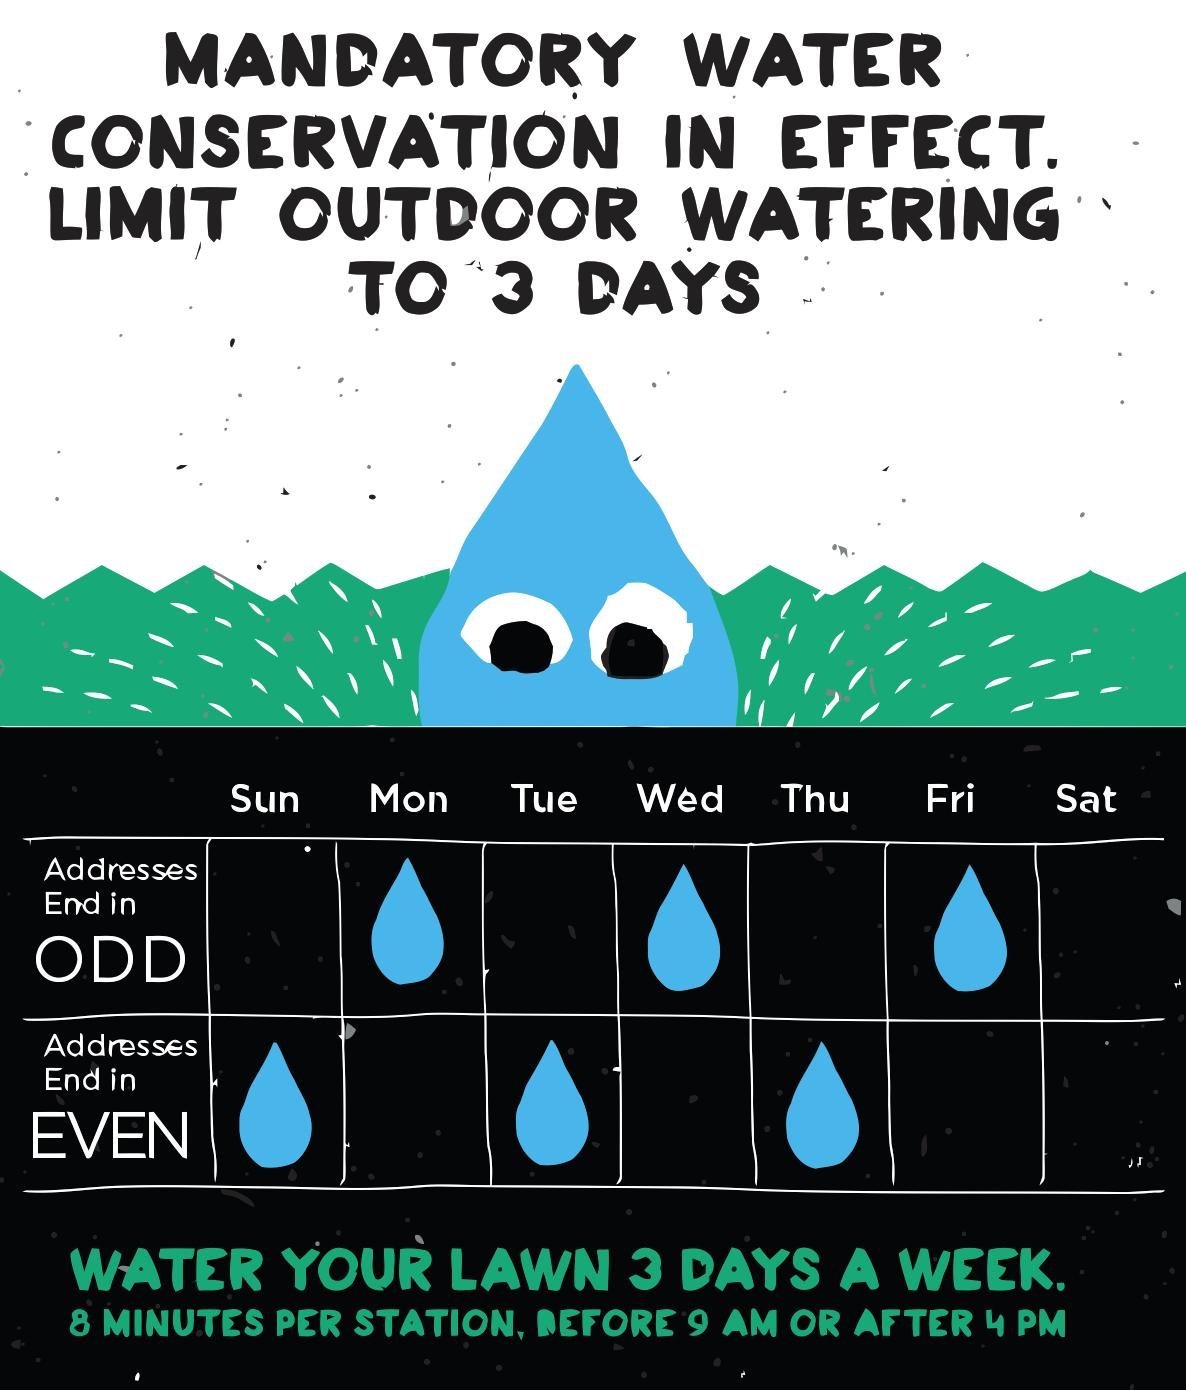 Mandatory Water Conservation in Effect – Limit Outdoor Watering to 3 Days